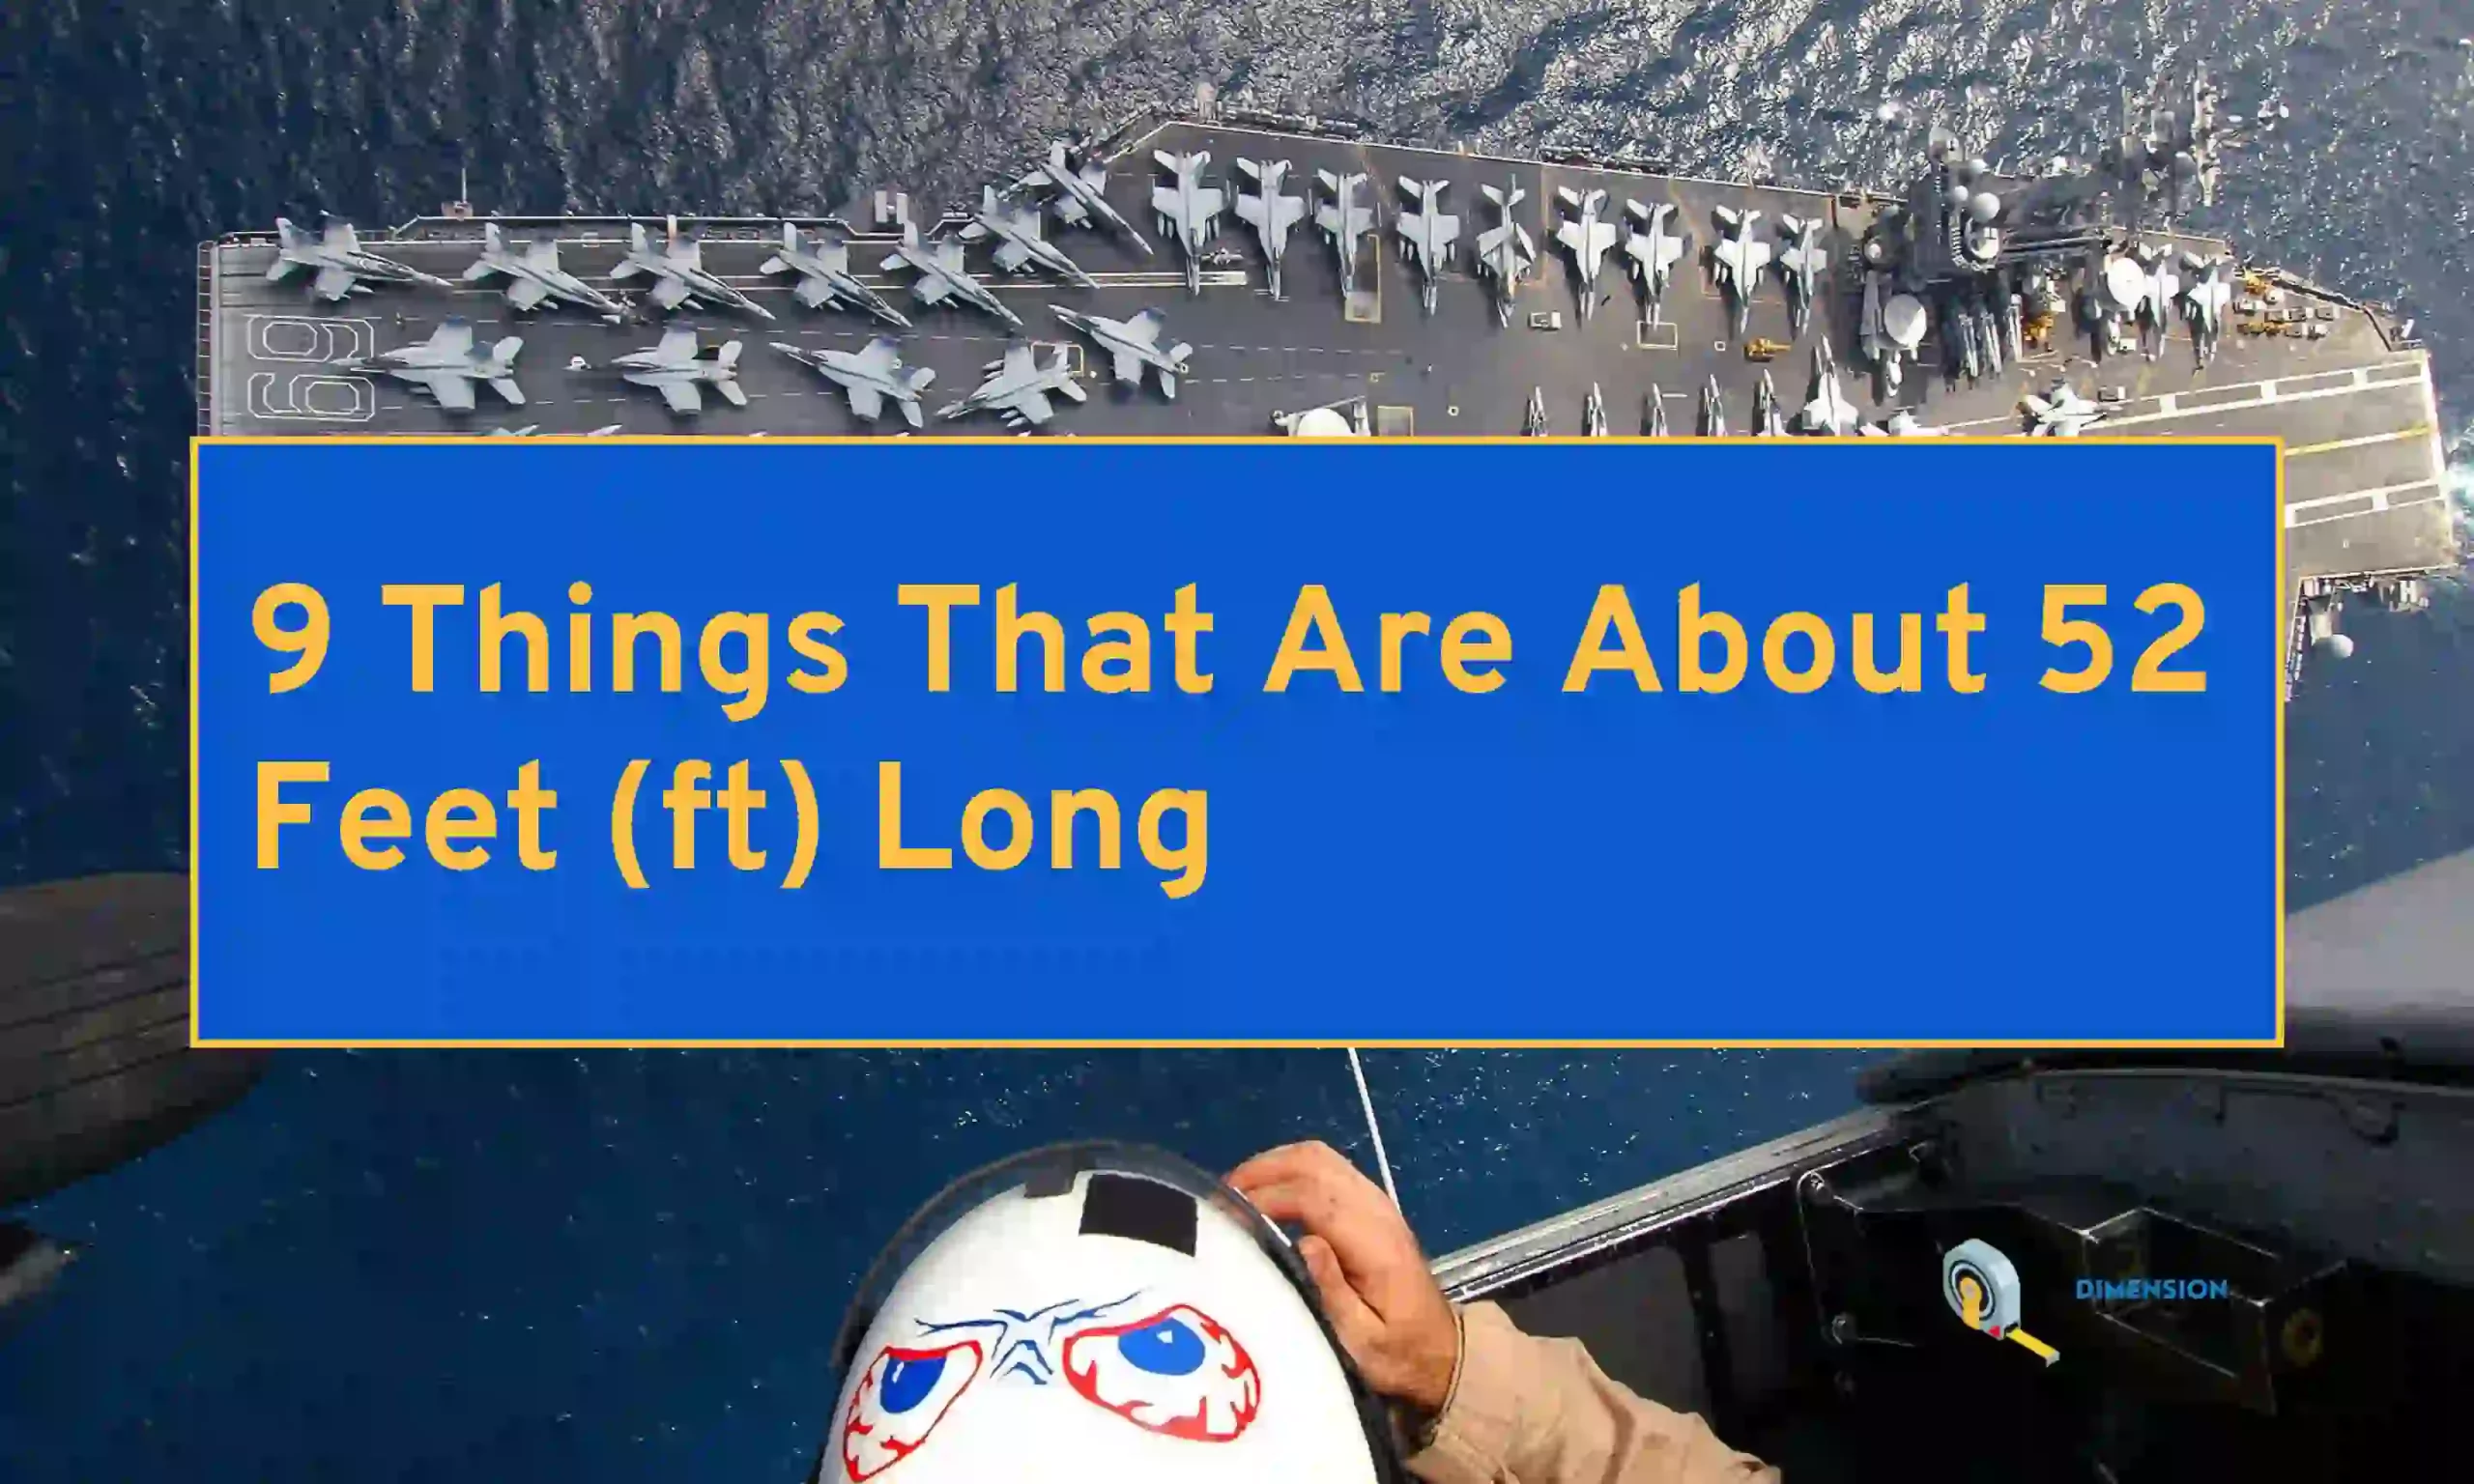 9 Things That Are About 52 Feet (ft) Long